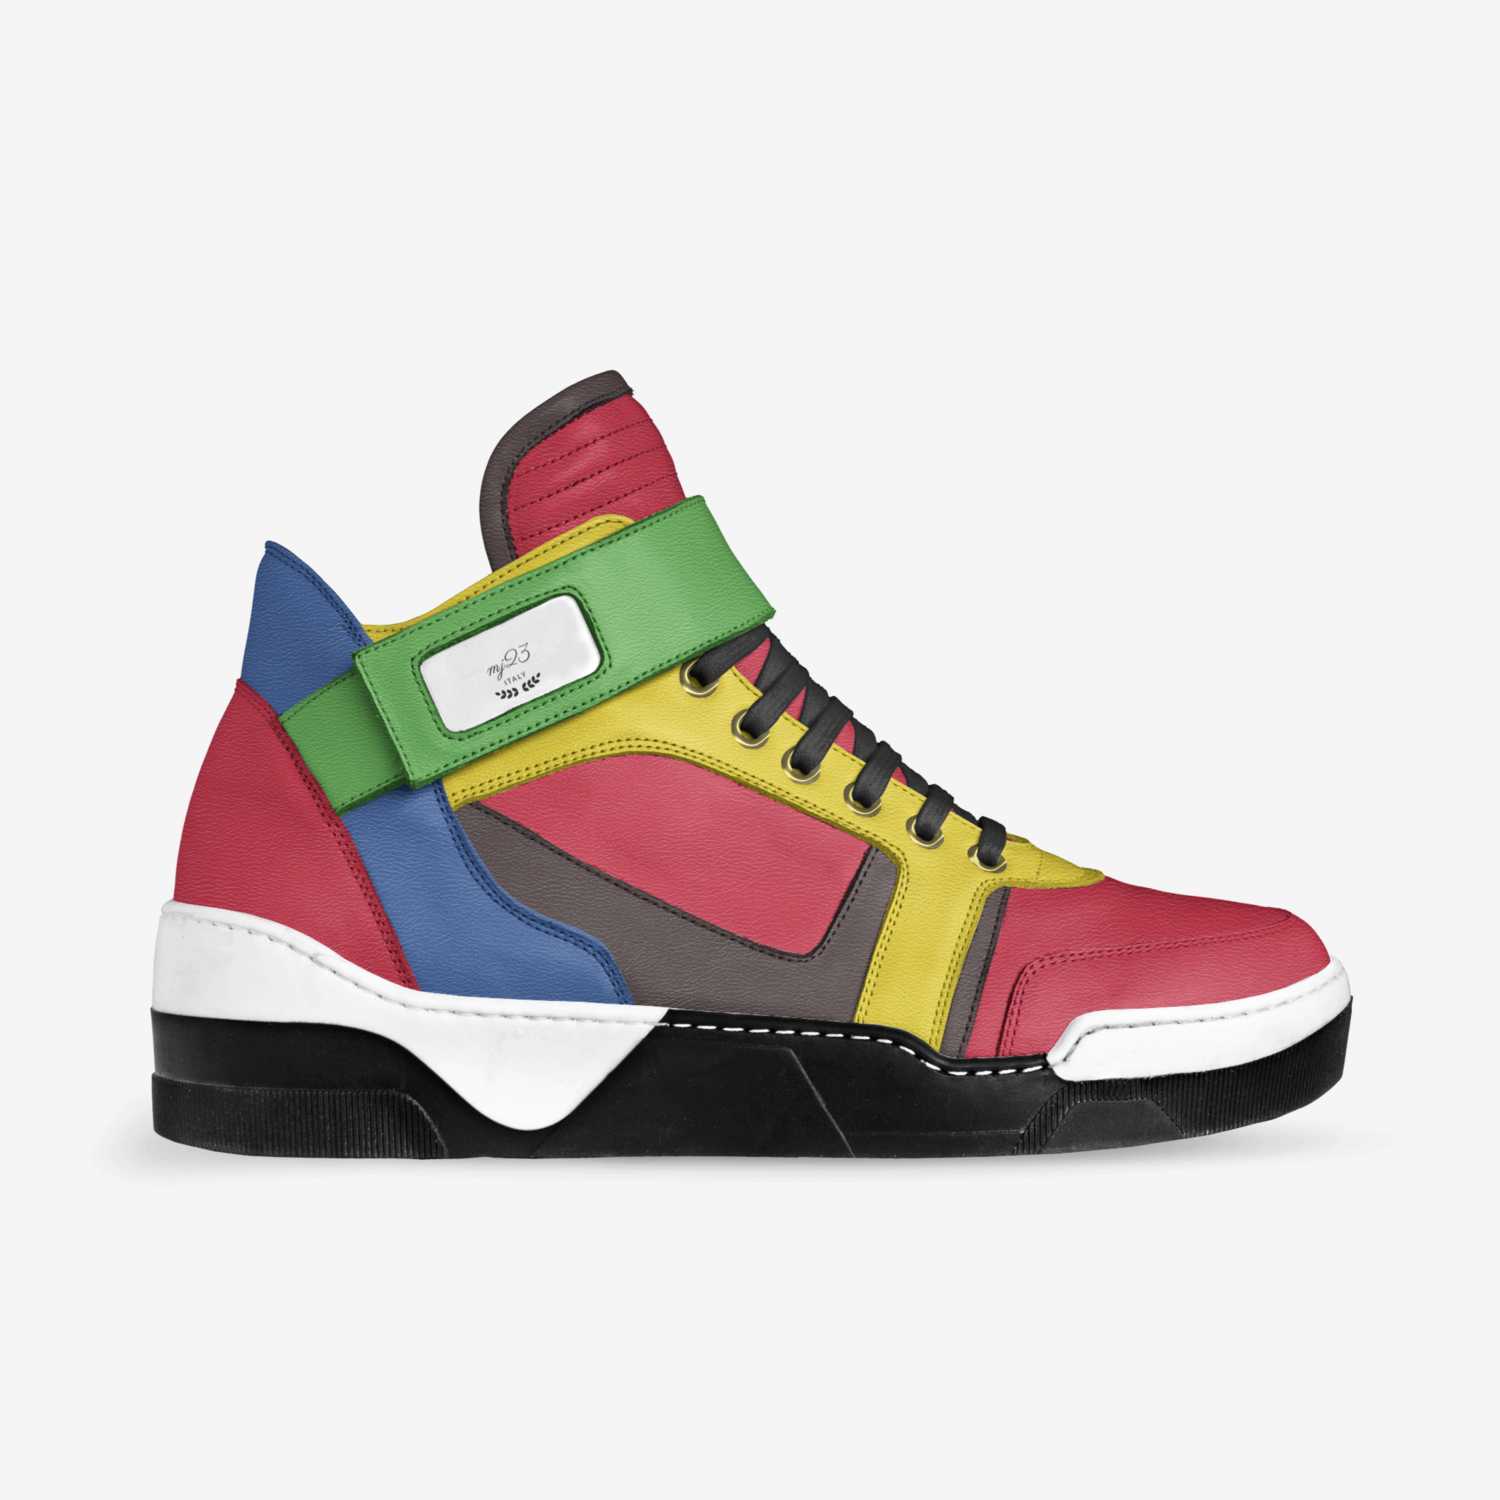 mj23 | A Custom Shoe concept by Mirease Johnson